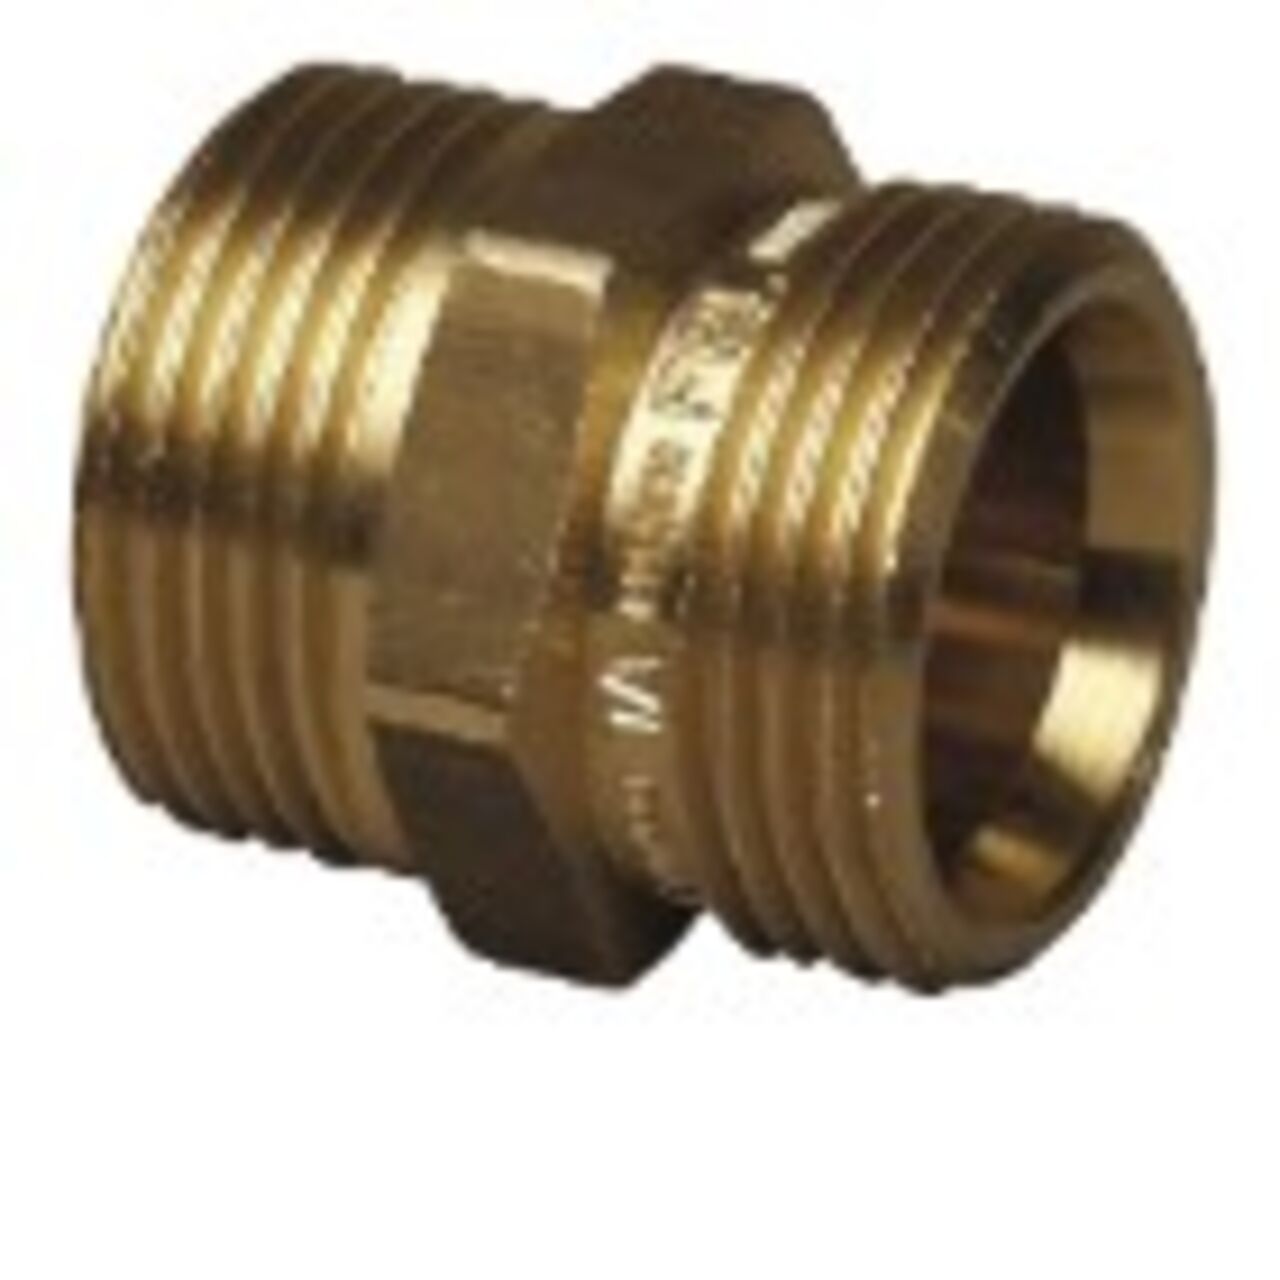 Uponor Nippel dobbel 3/4" x M 34 1